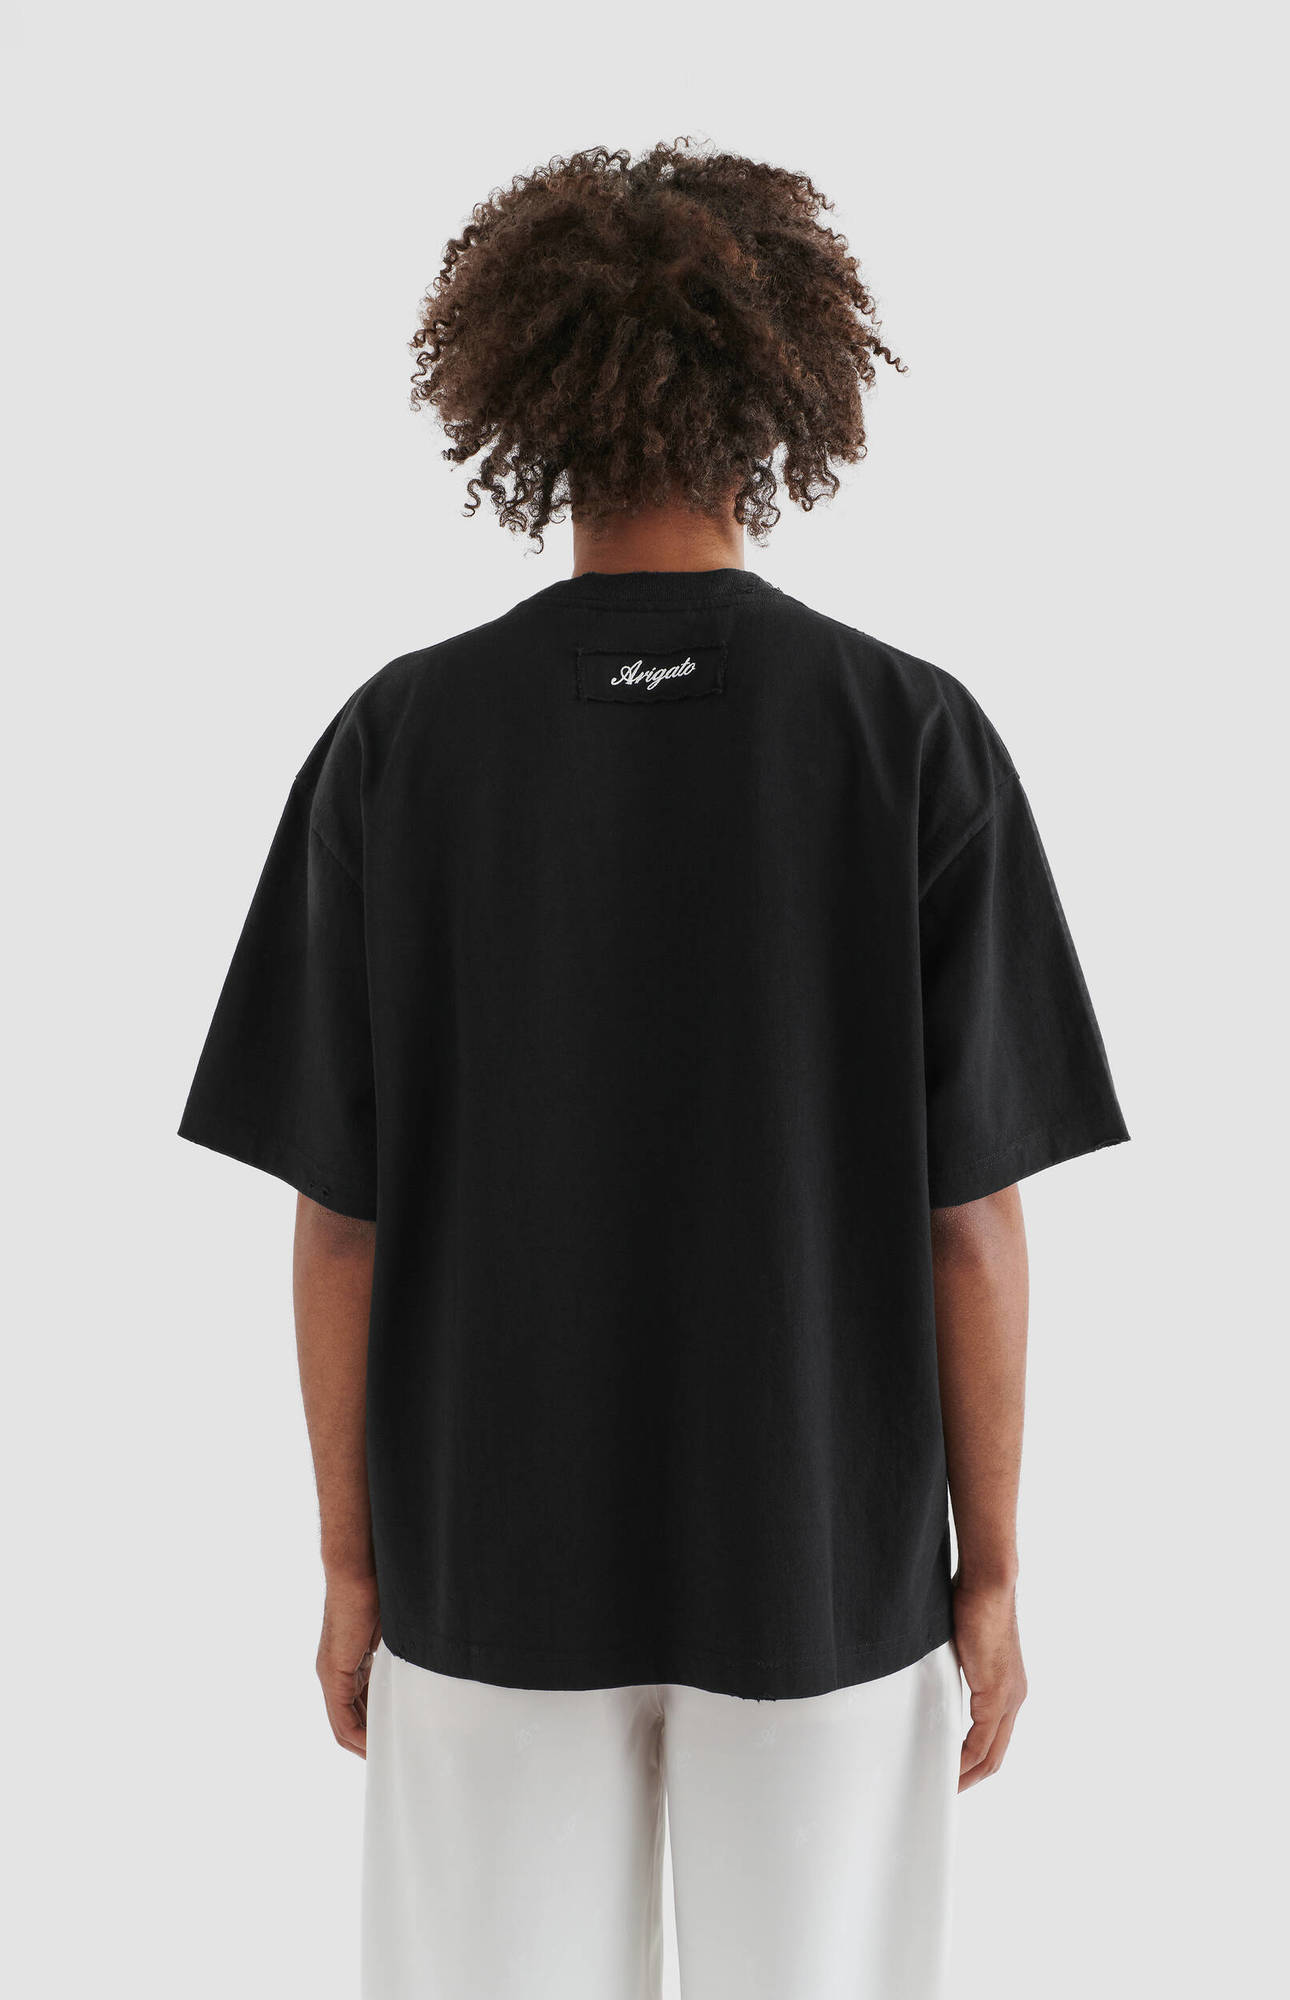 AXEL ARIGATO Series Distressed T-Shirt Backprinted in Black XL